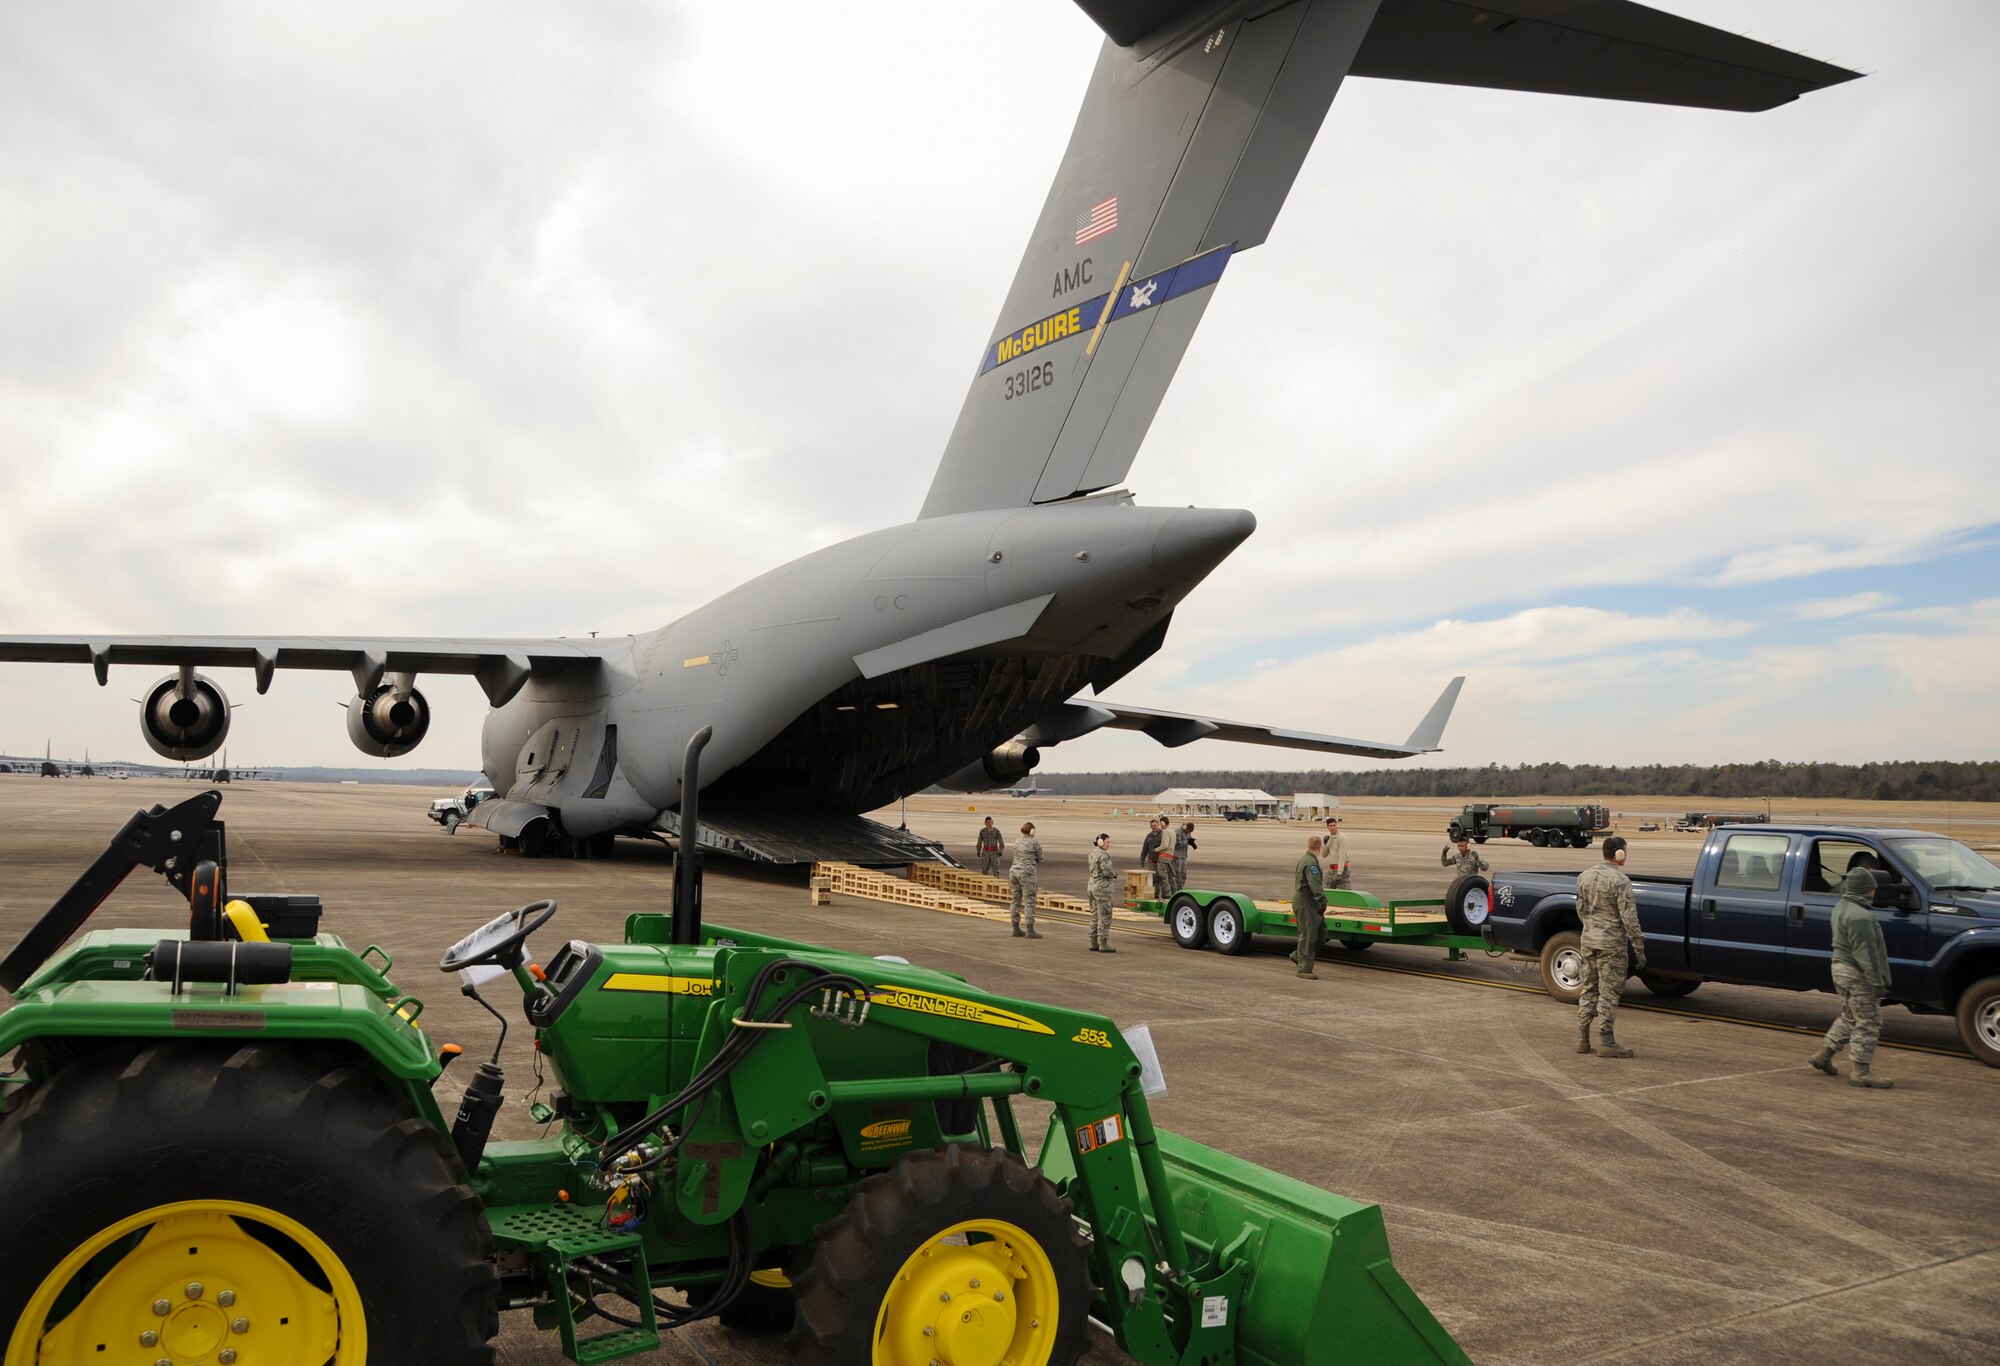 A team of “port dawgs” prepares to load a tractor and trailer onto a C-17 Feb. 13, 2015, at Little Rock Air Force Base, Ark. The supplies were donated by a local Arkansas organization for delivery to Haiti by Airmen as part of humanitarian efforts.  (U.S. Air Force photo by Airman 1st Class Harry Brexel)  